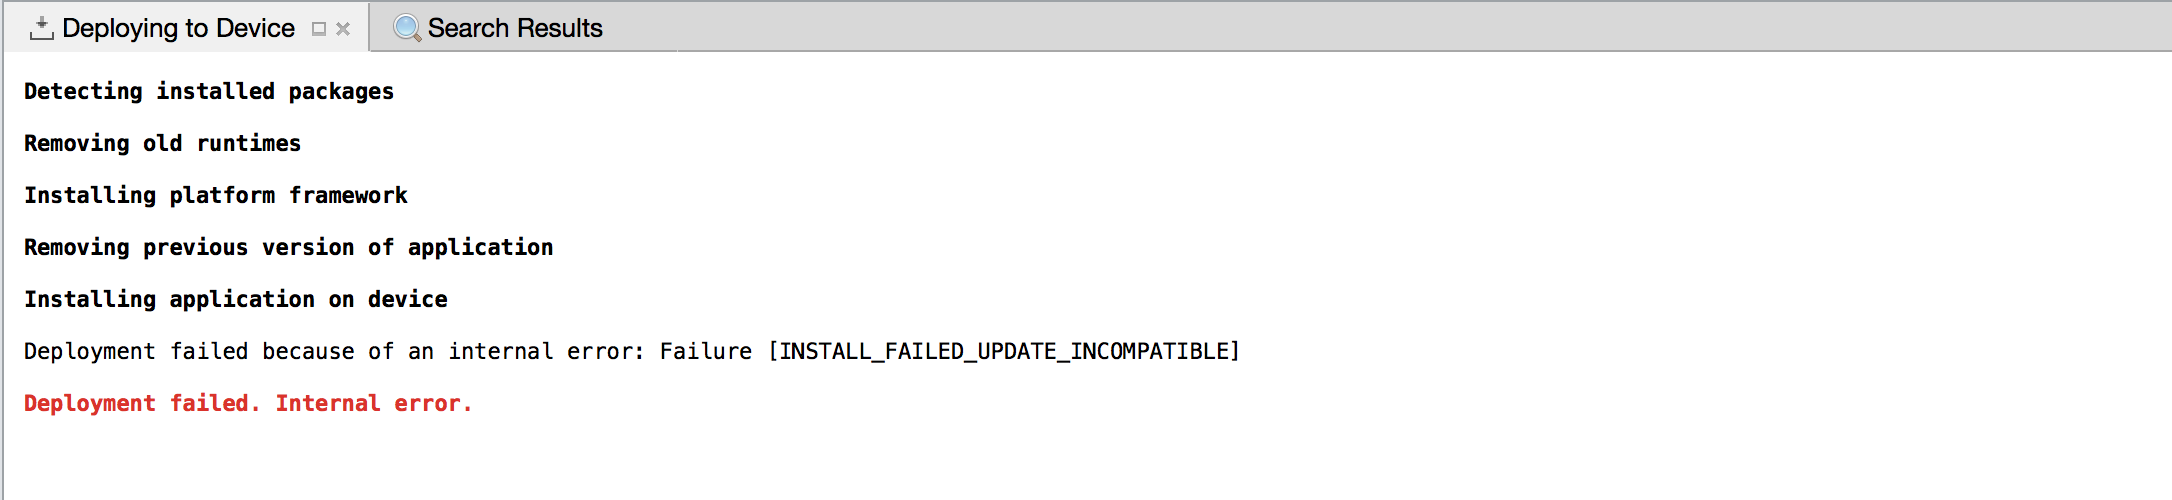 INSTALL_FAILED_UPDATE_INCOMPATIBLE